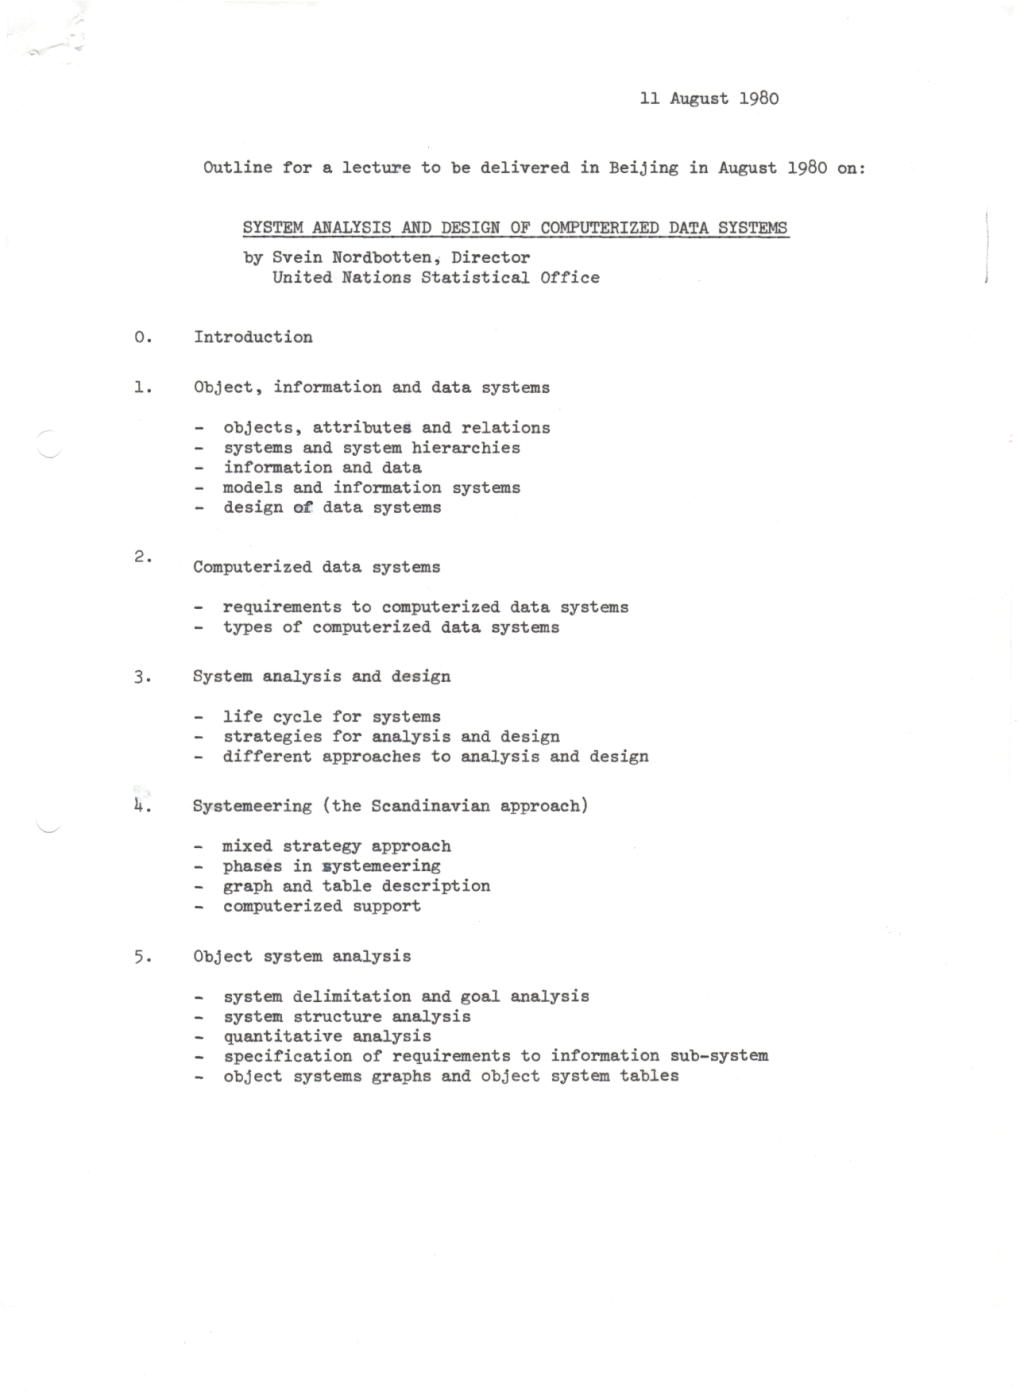 11 August 1980 Outline for a Lecture to Be Delivered in Beijing In